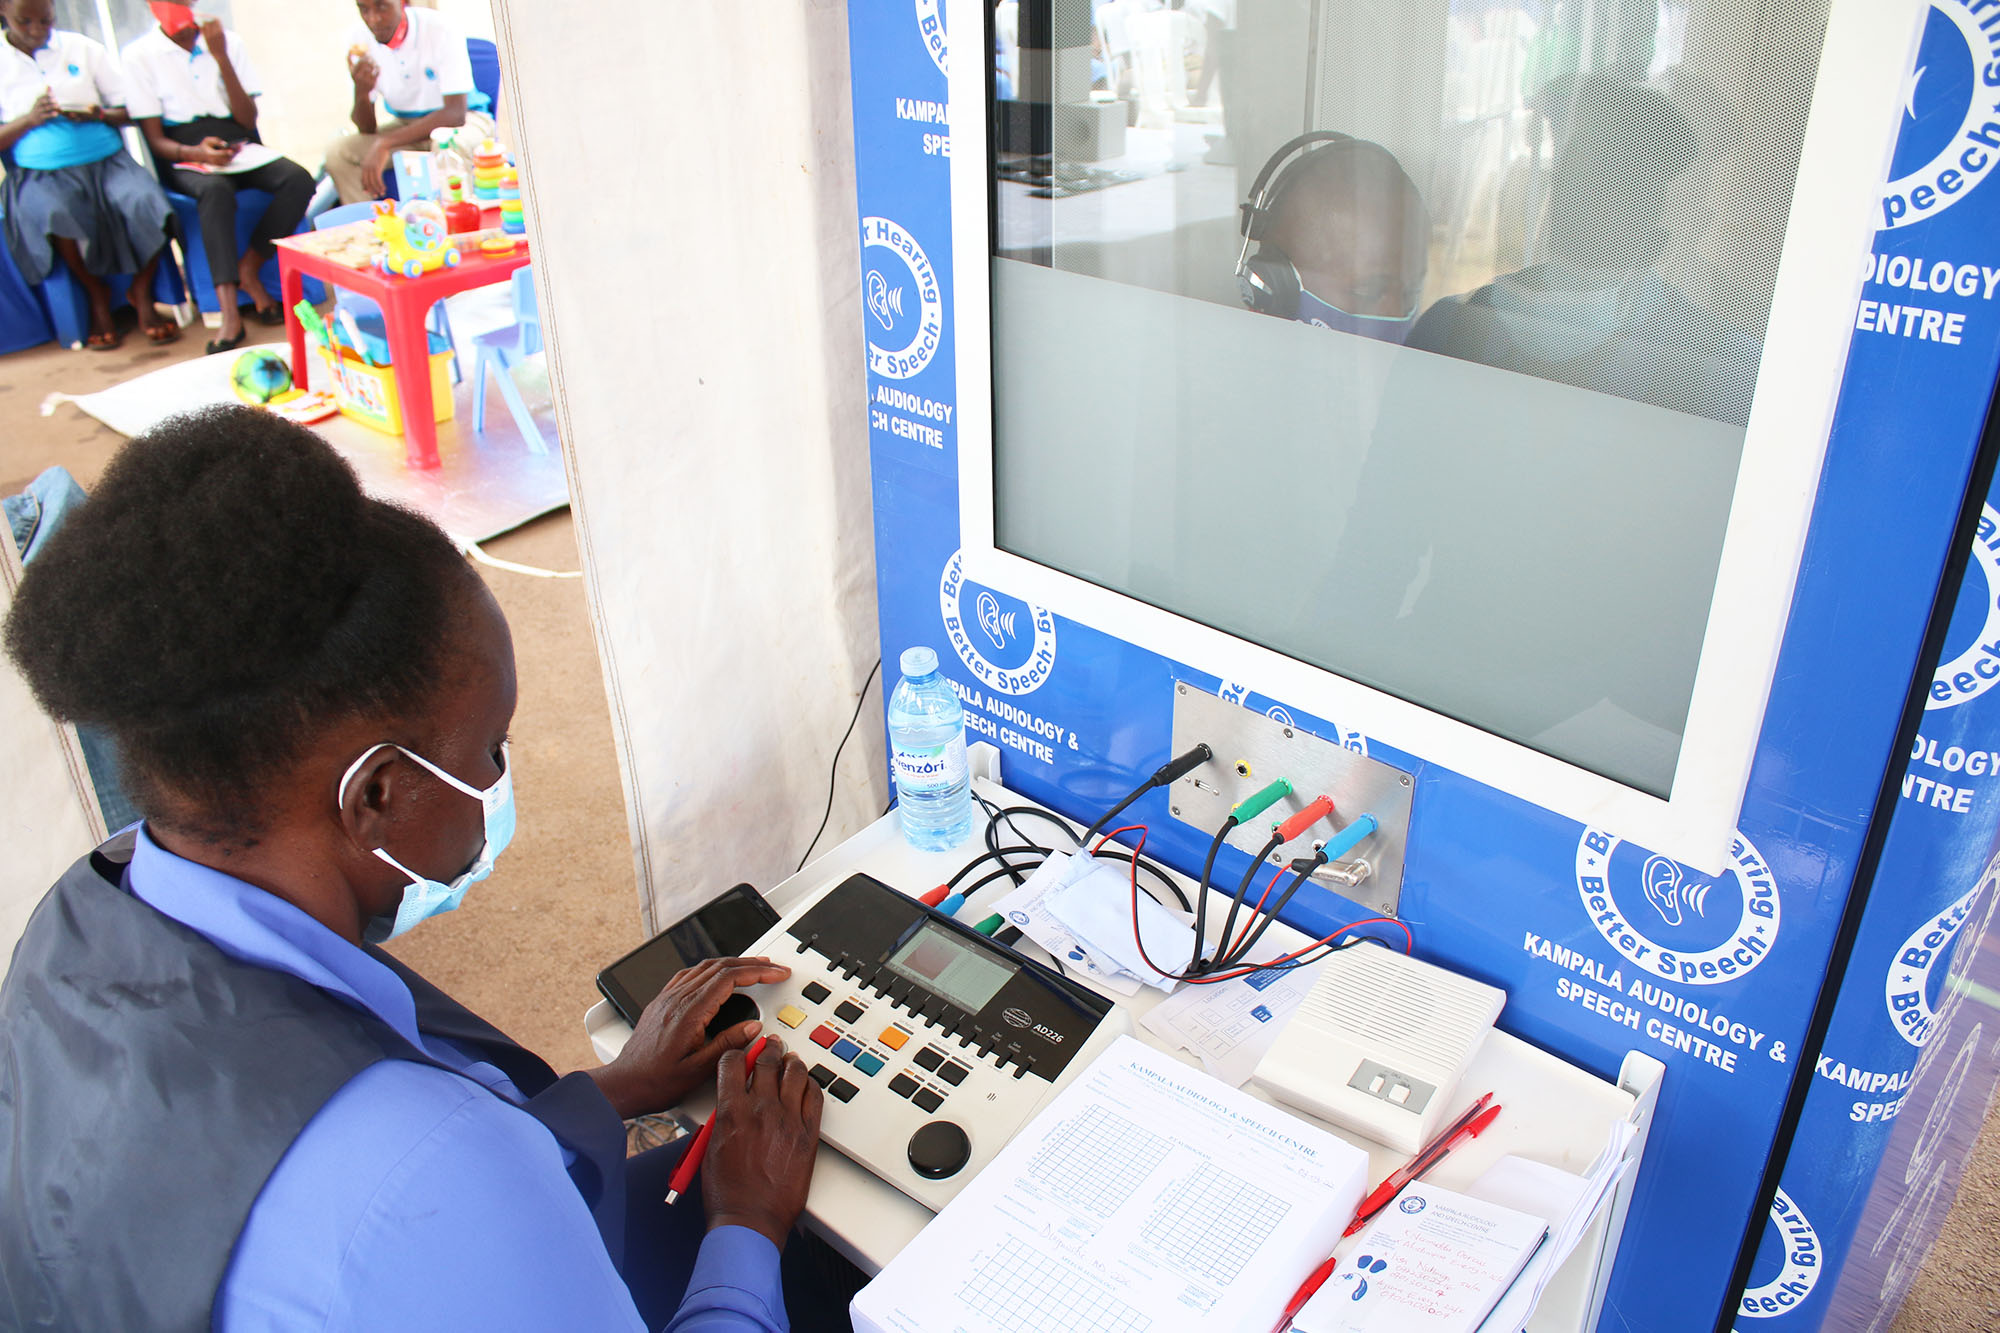 Ms. Josephine Likichoru carries out hearing test using our mobile audiology booth during World Hearing Day 2022